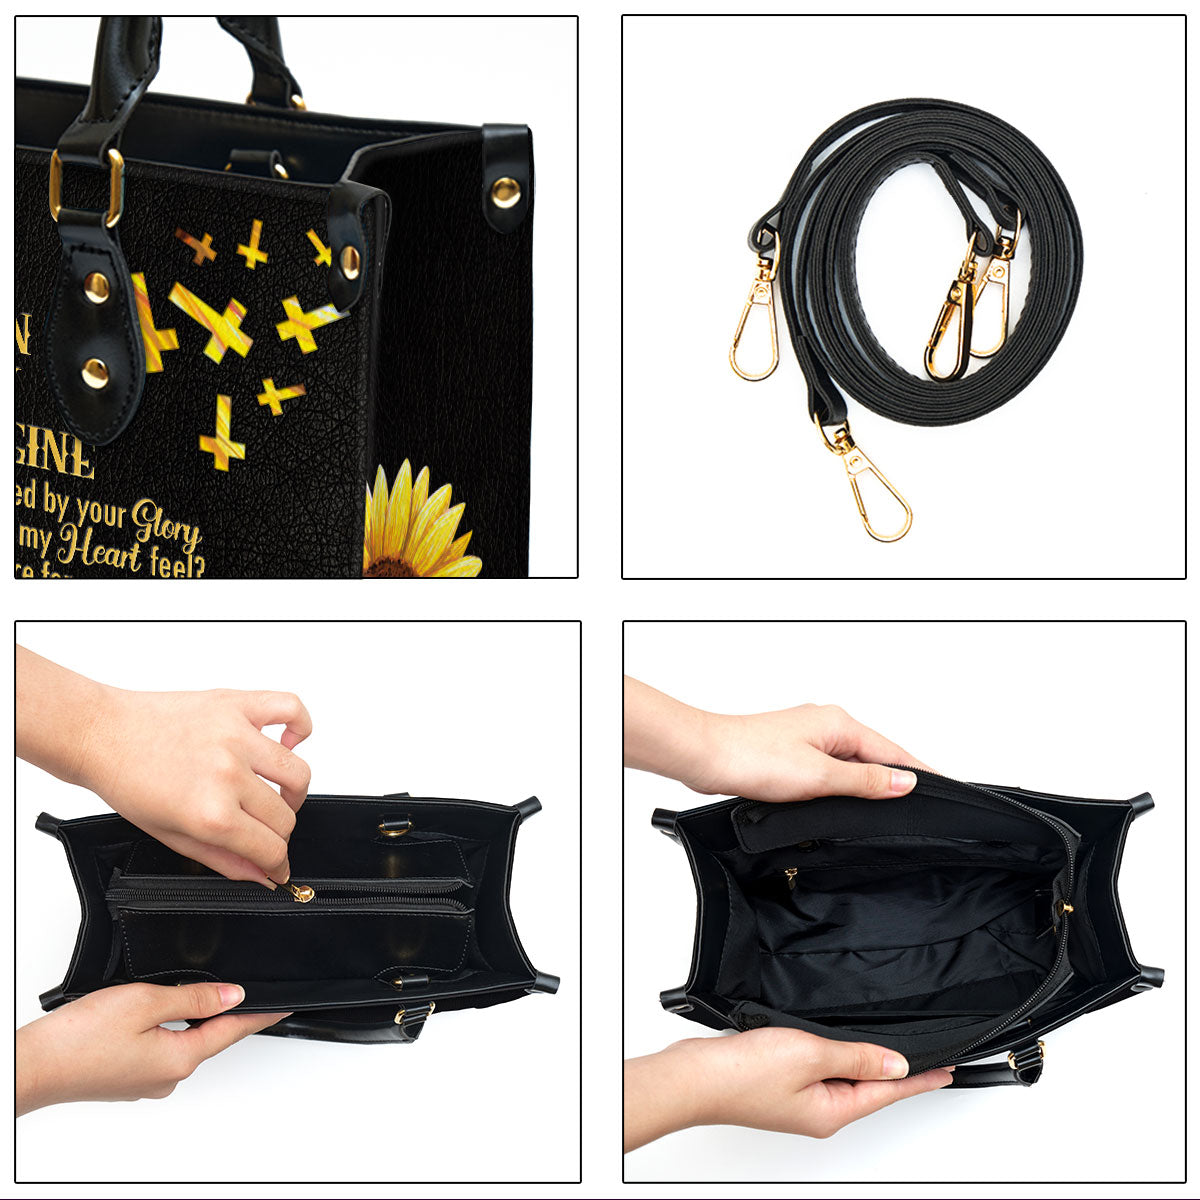 I Can Only Imagine Sunflower And Cross Personalized Leather Handbag With Handle - Gifts For Religious Women